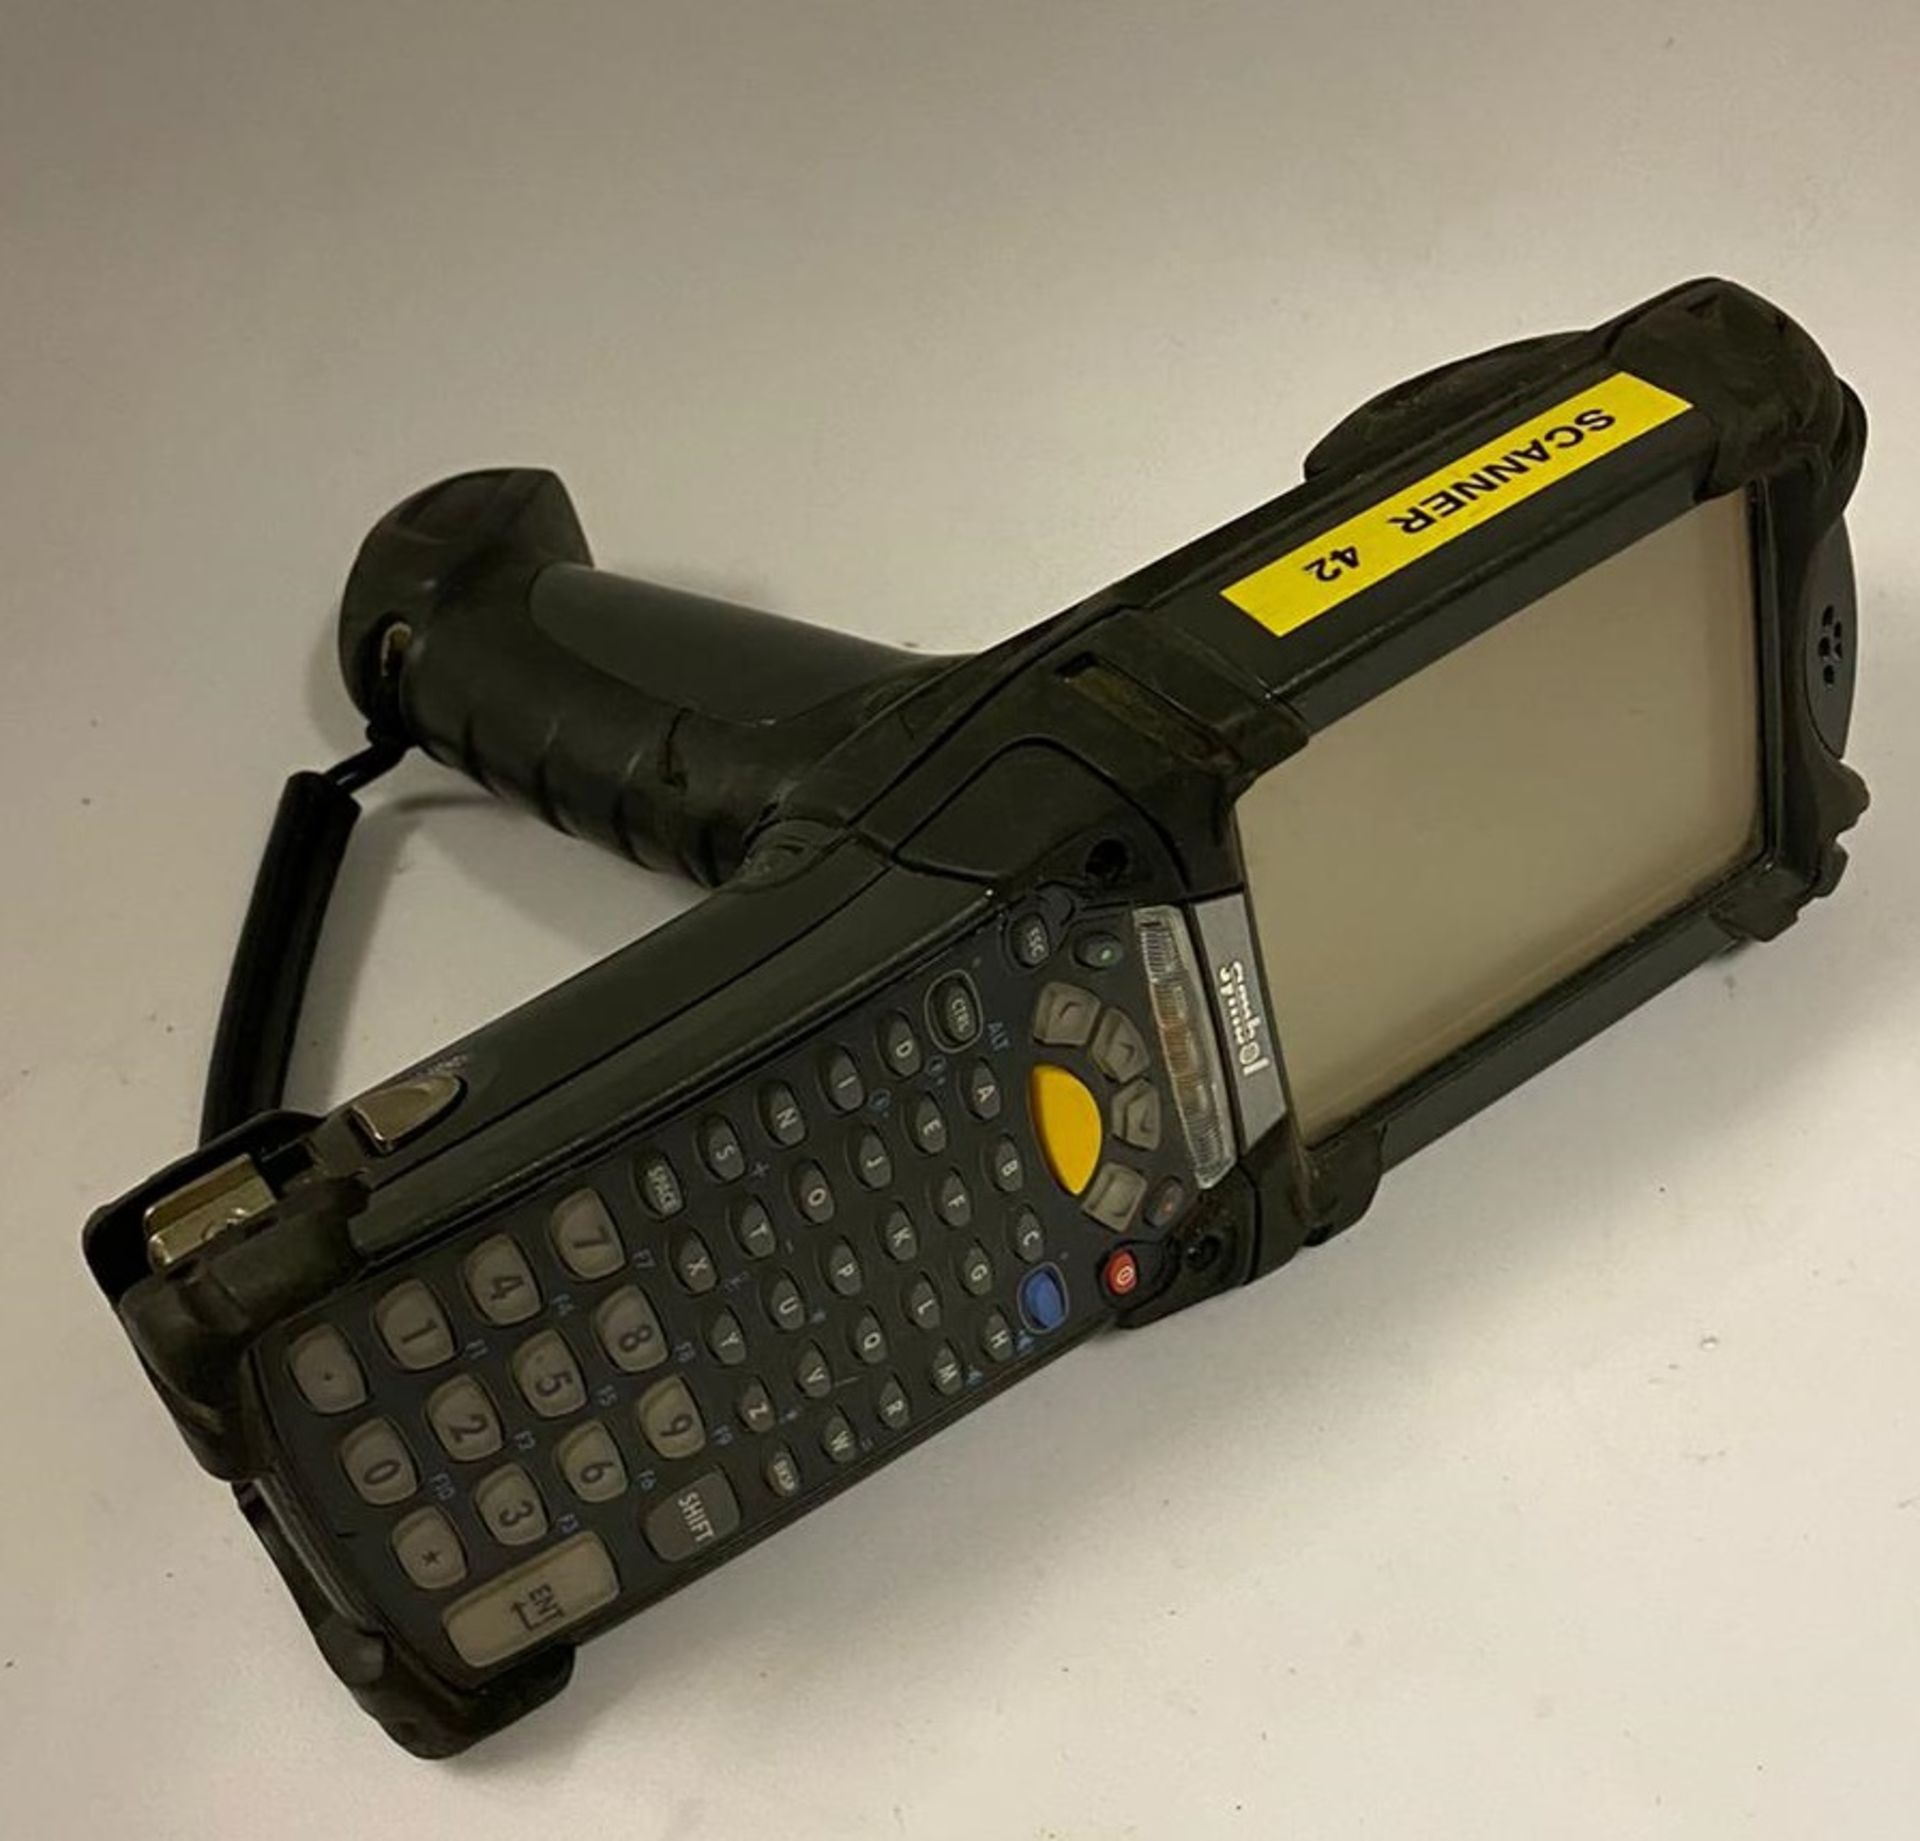 1 x Symbole MC9010 Mobile Barcode Scanner - Used Condition (See Below) - Location: Altrincham WA14 - Image 5 of 6